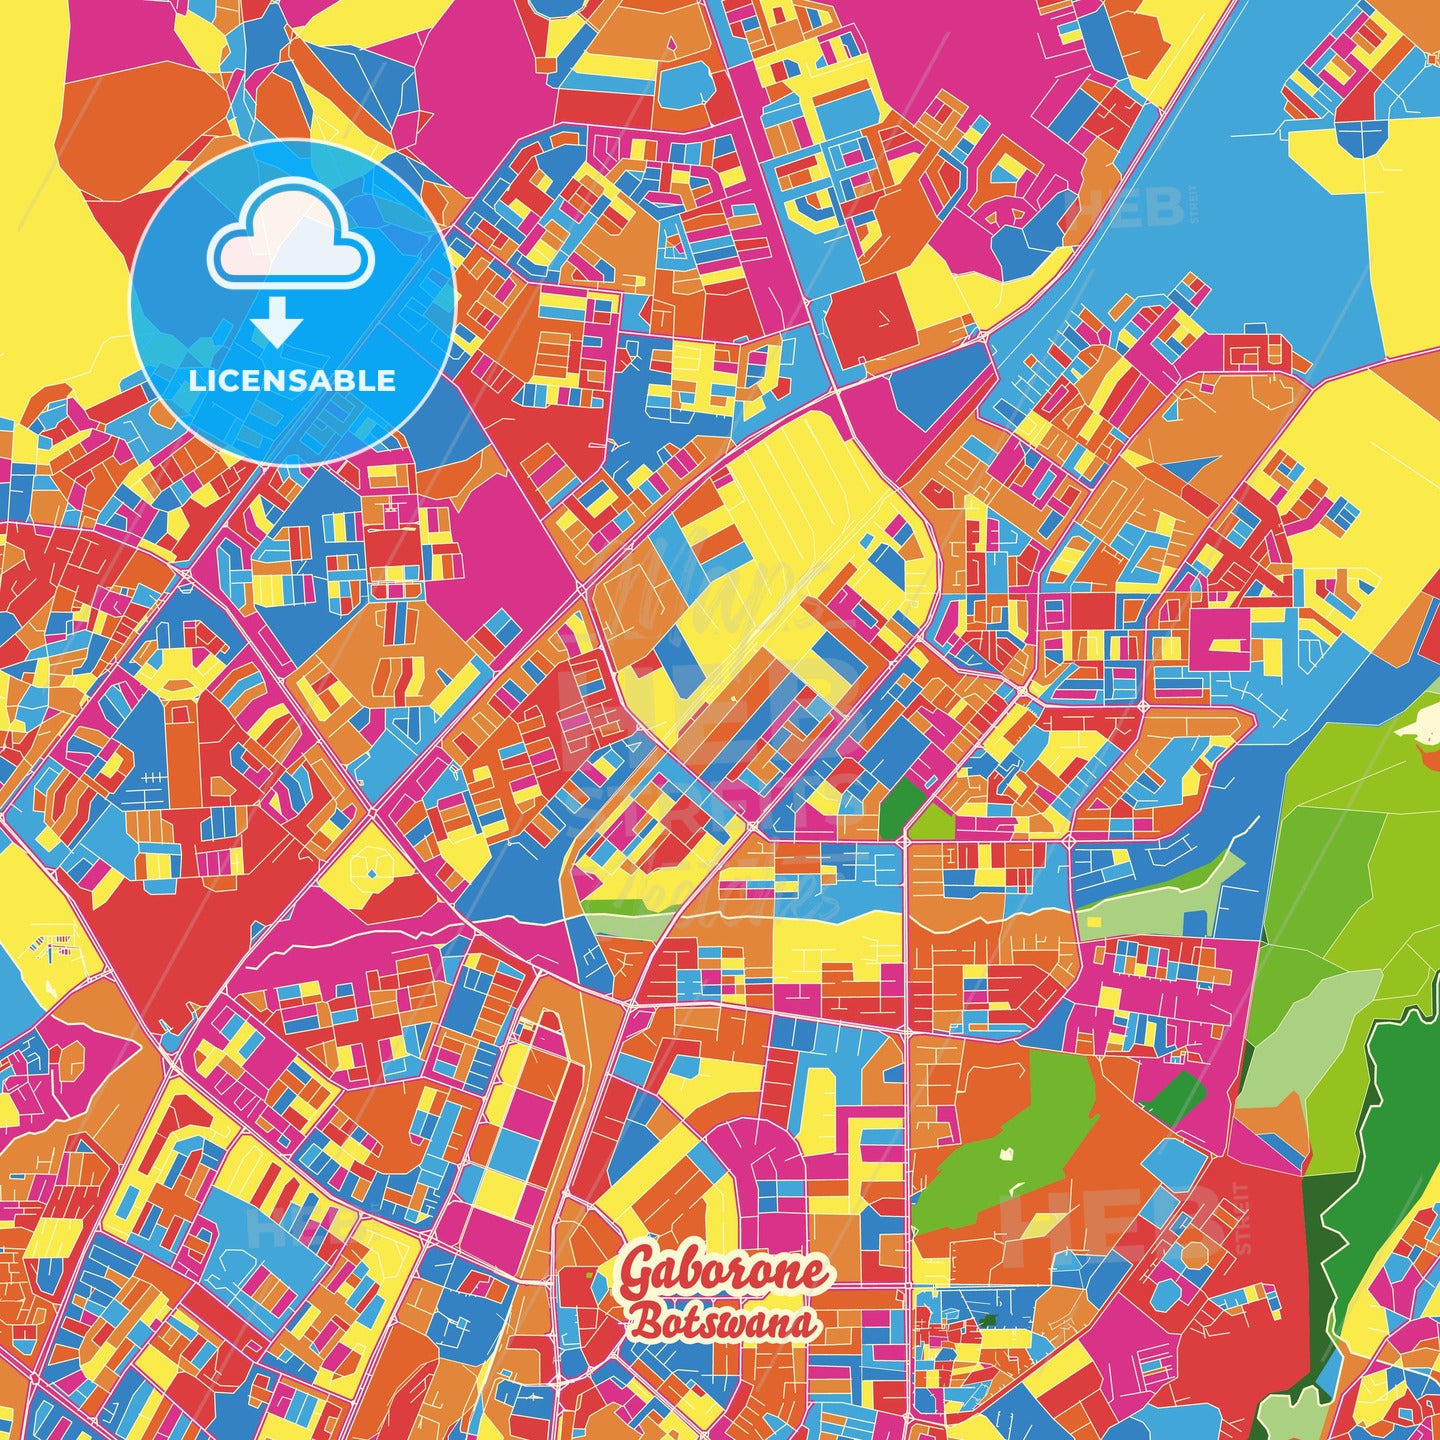 Gaborone, Botswana Crazy Colorful Street Map Poster Template - HEBSTREITS Sketches